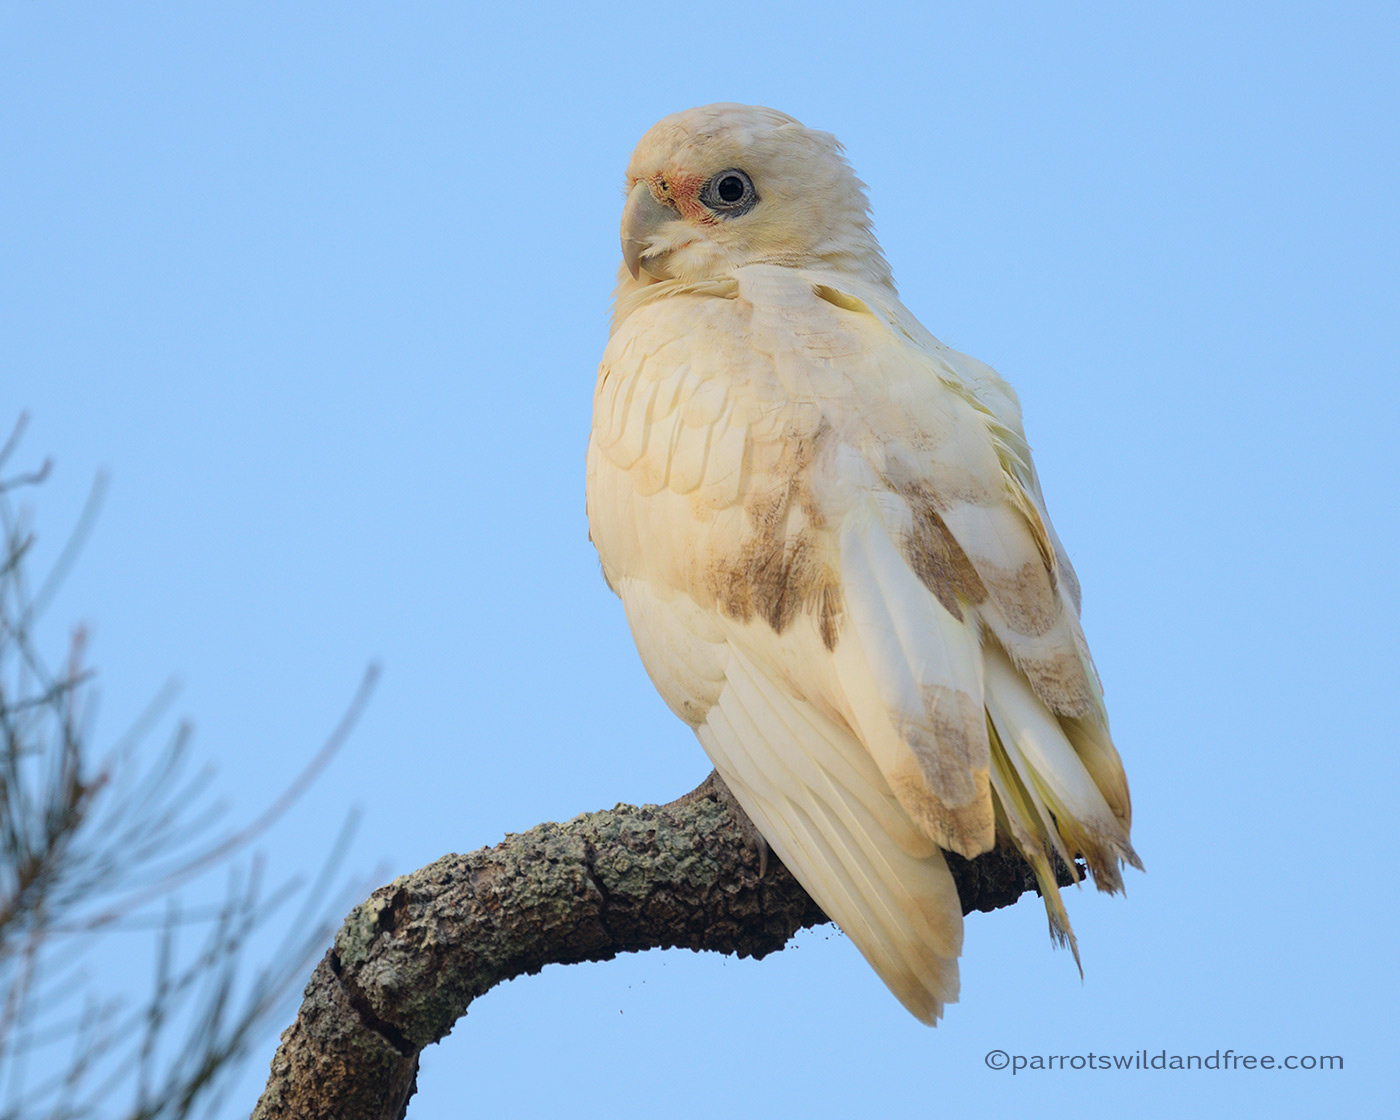 Little Corella with possible PBFD psittacine beak and feather disease